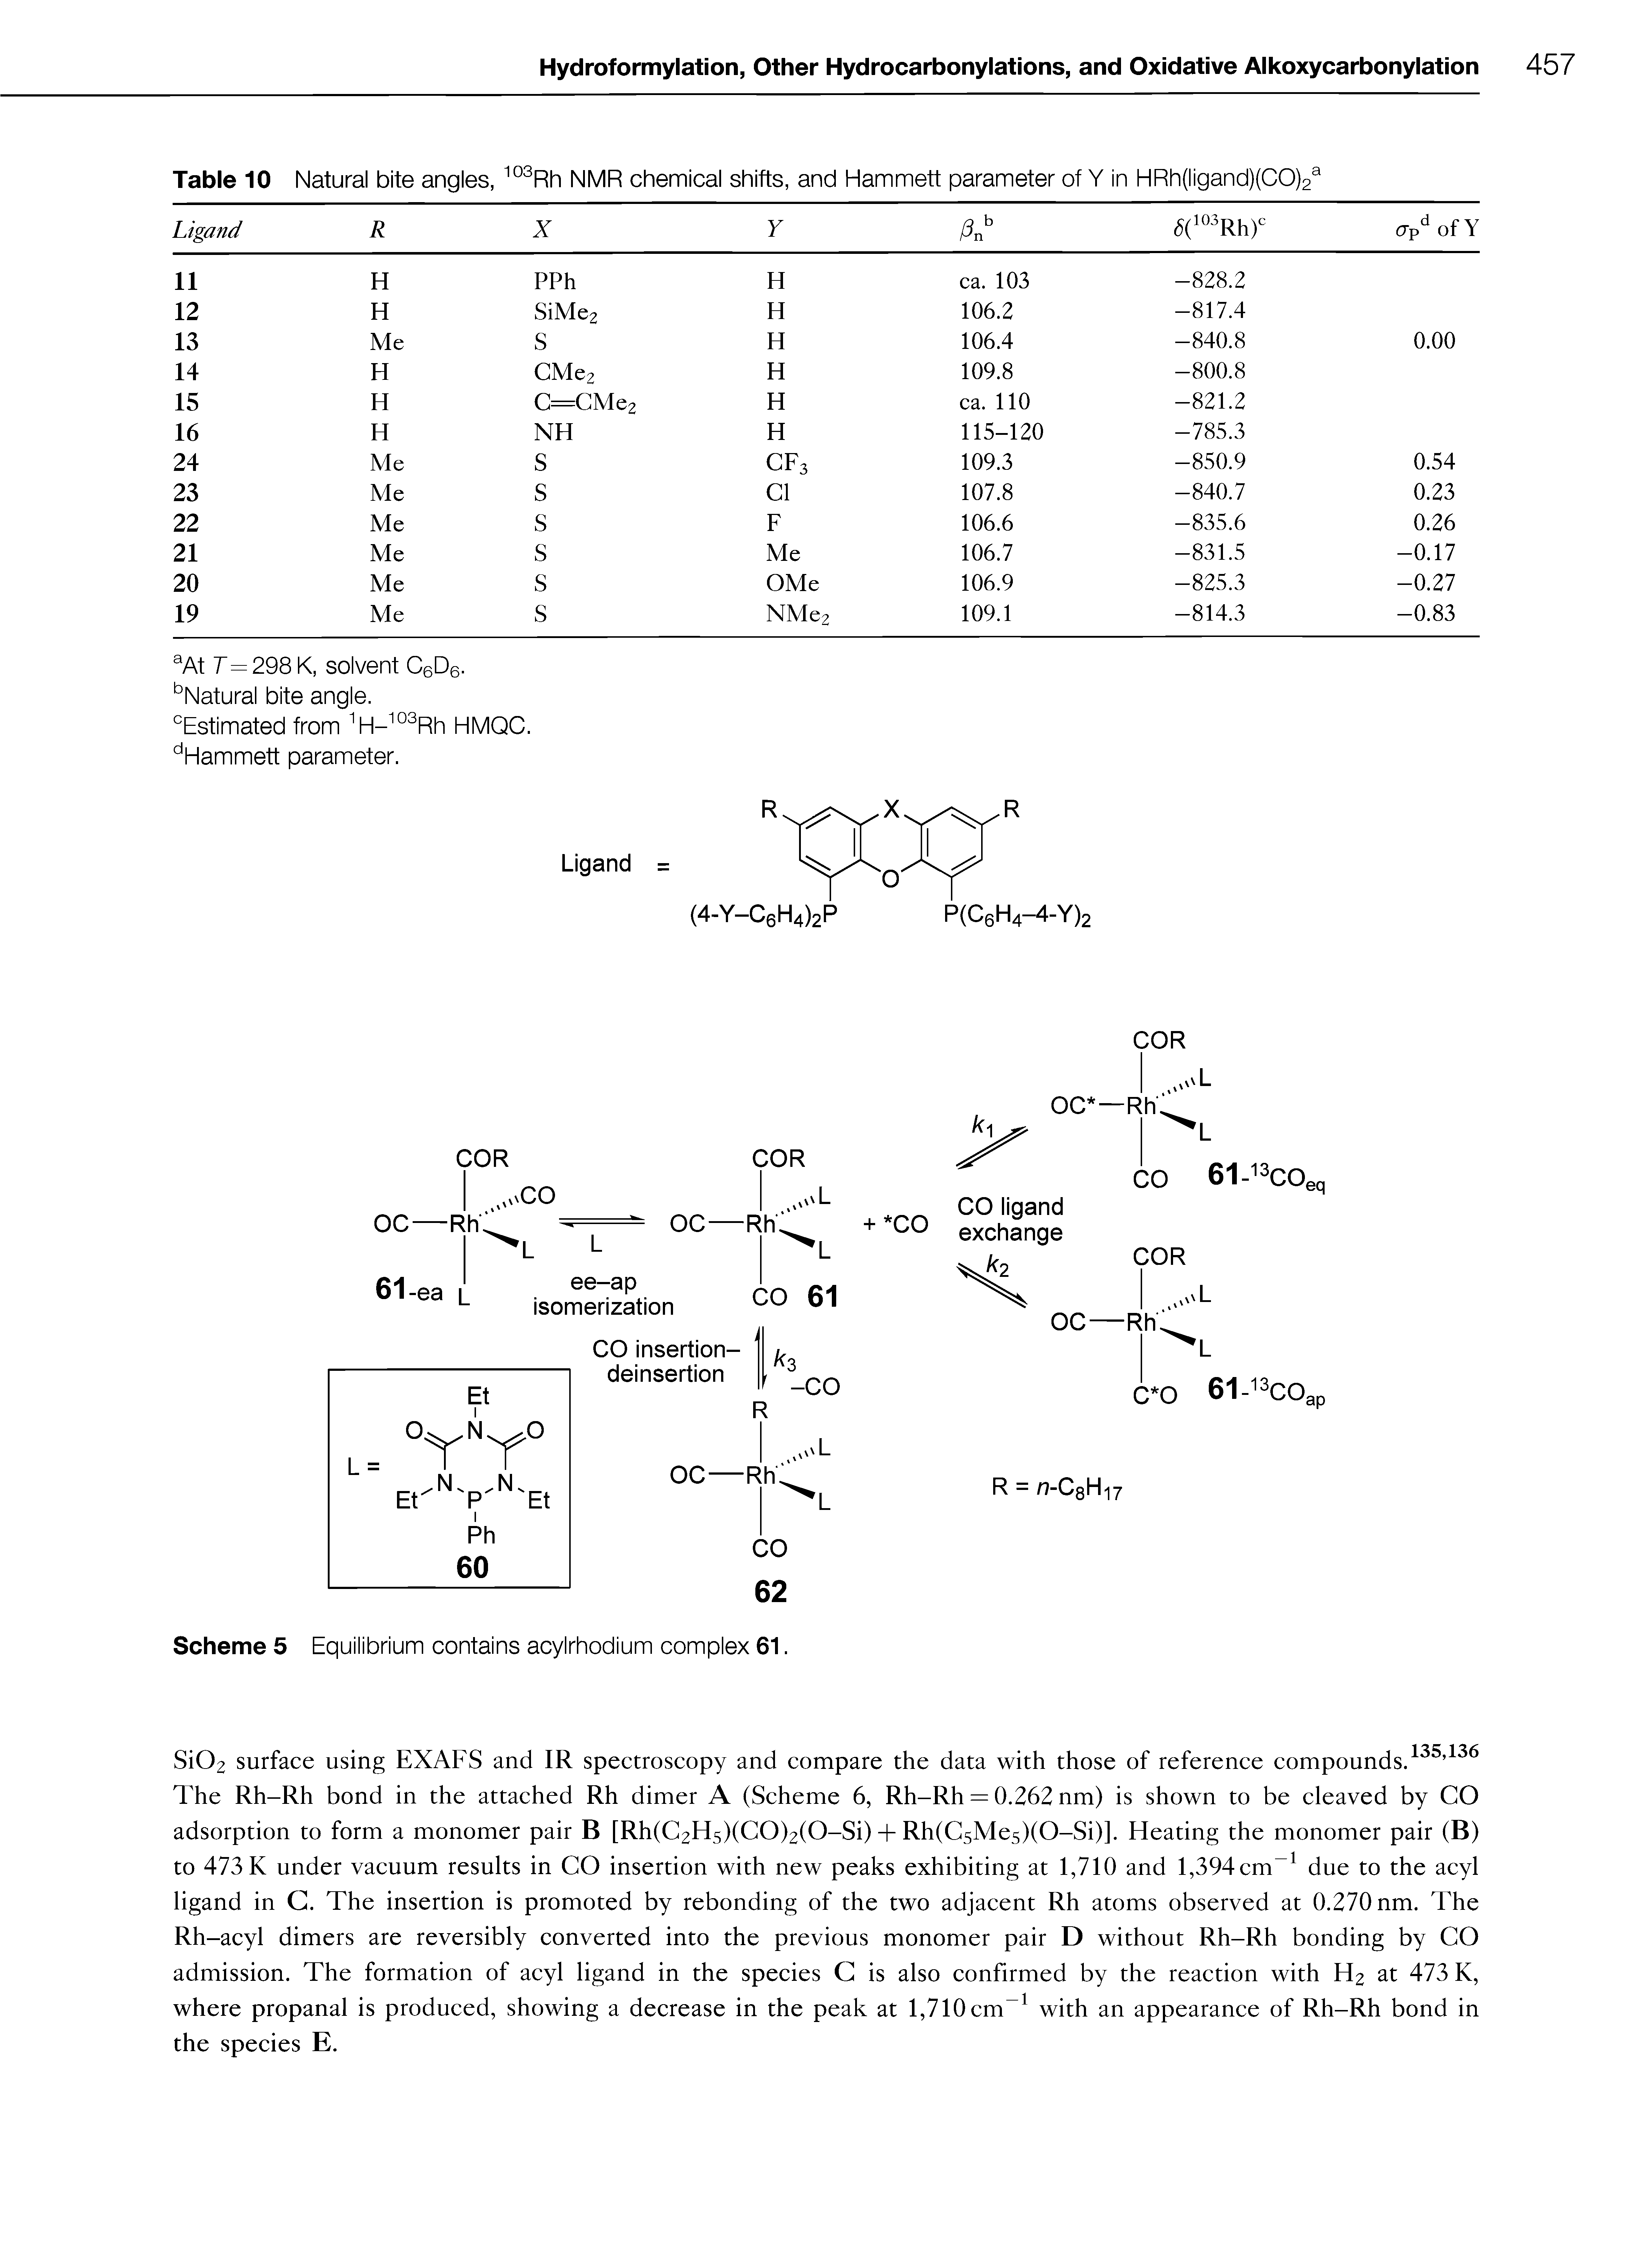 Table 10 Natural bite angles, NMR chennical shifts, and Hammett parameter of Y in HRh(ligand)(CO)2 ...